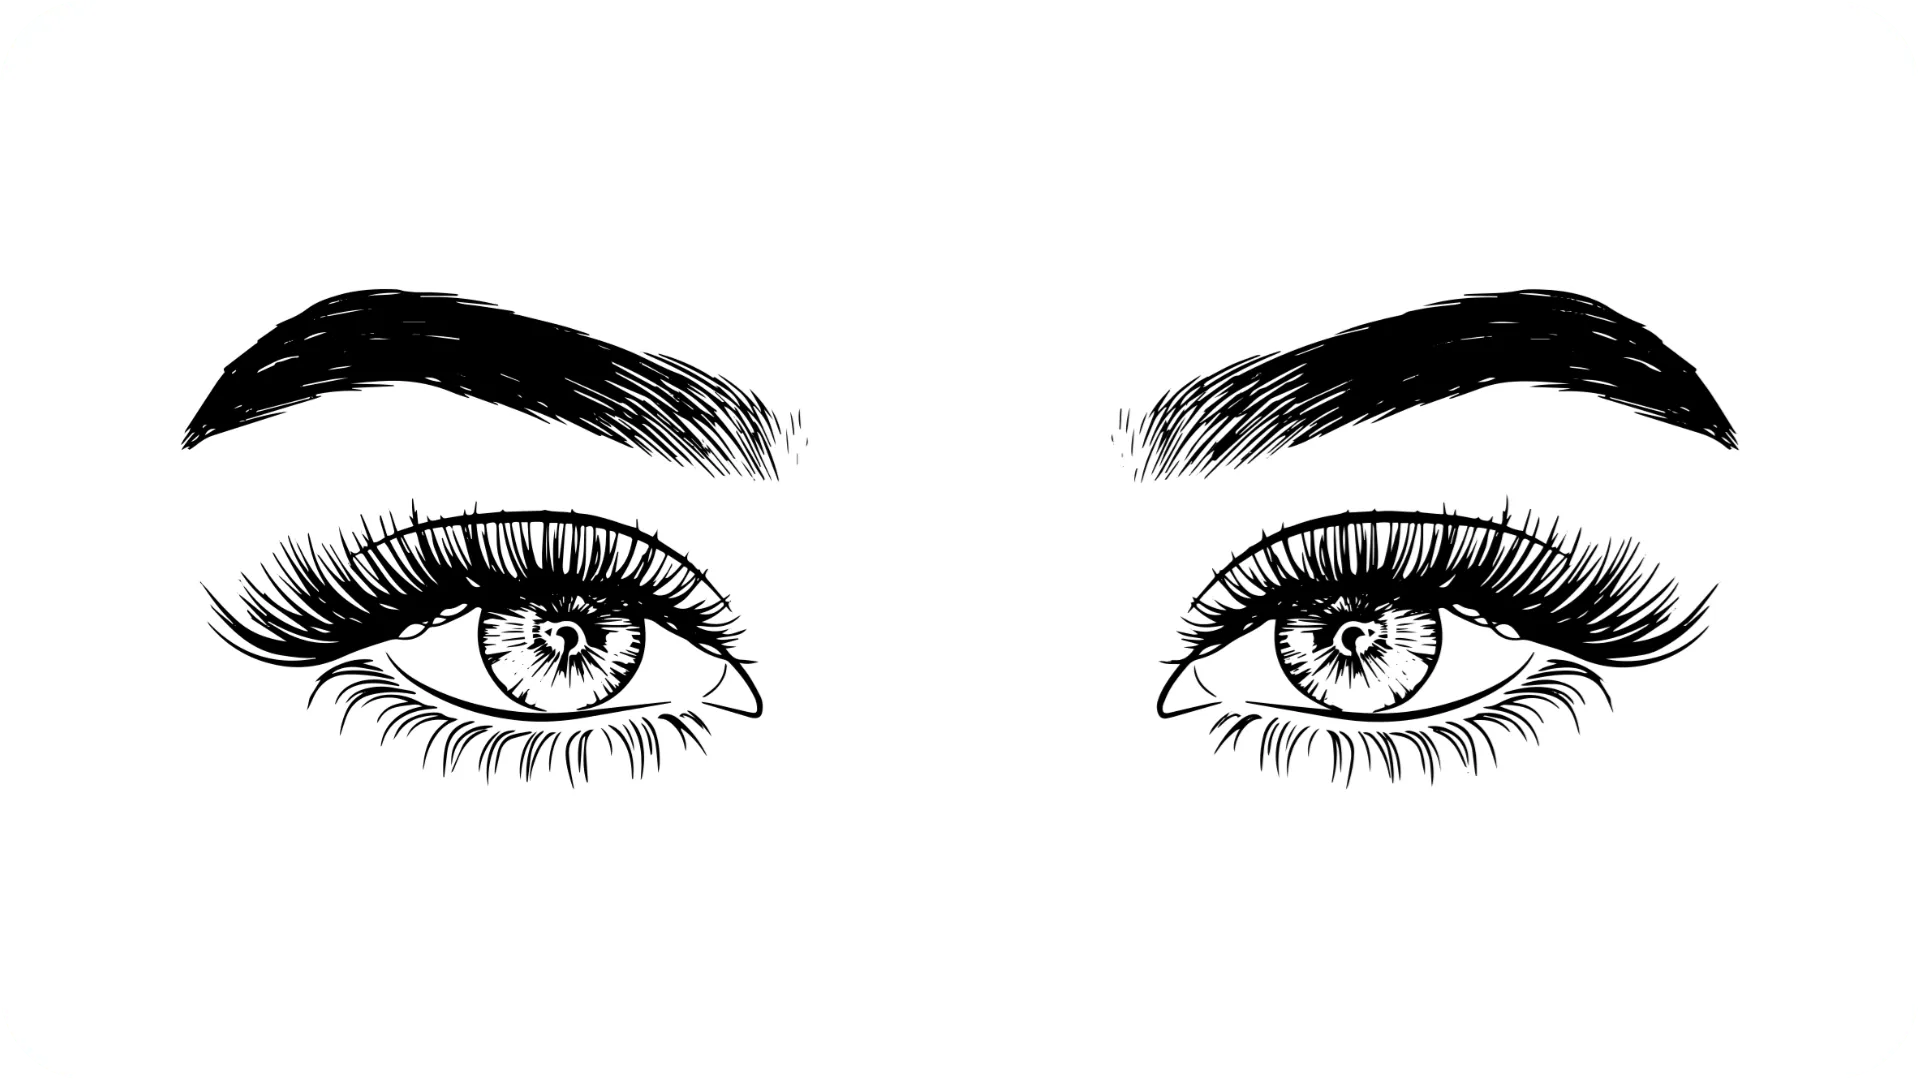 A black line drawing on a white background of a pair of feminine eyes and eyebrows.